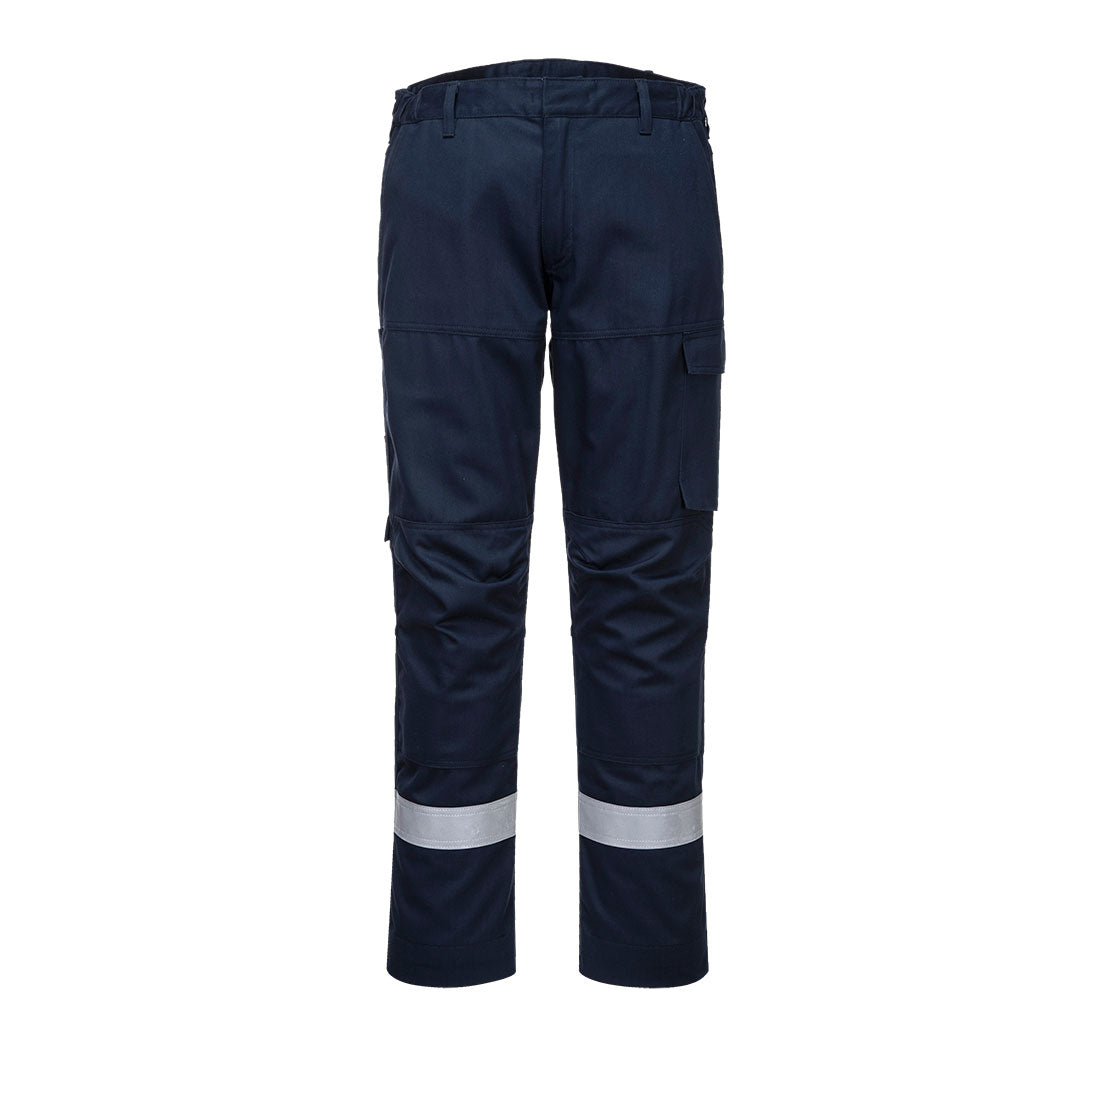 Bizflame Industry Trousers  (FR66)